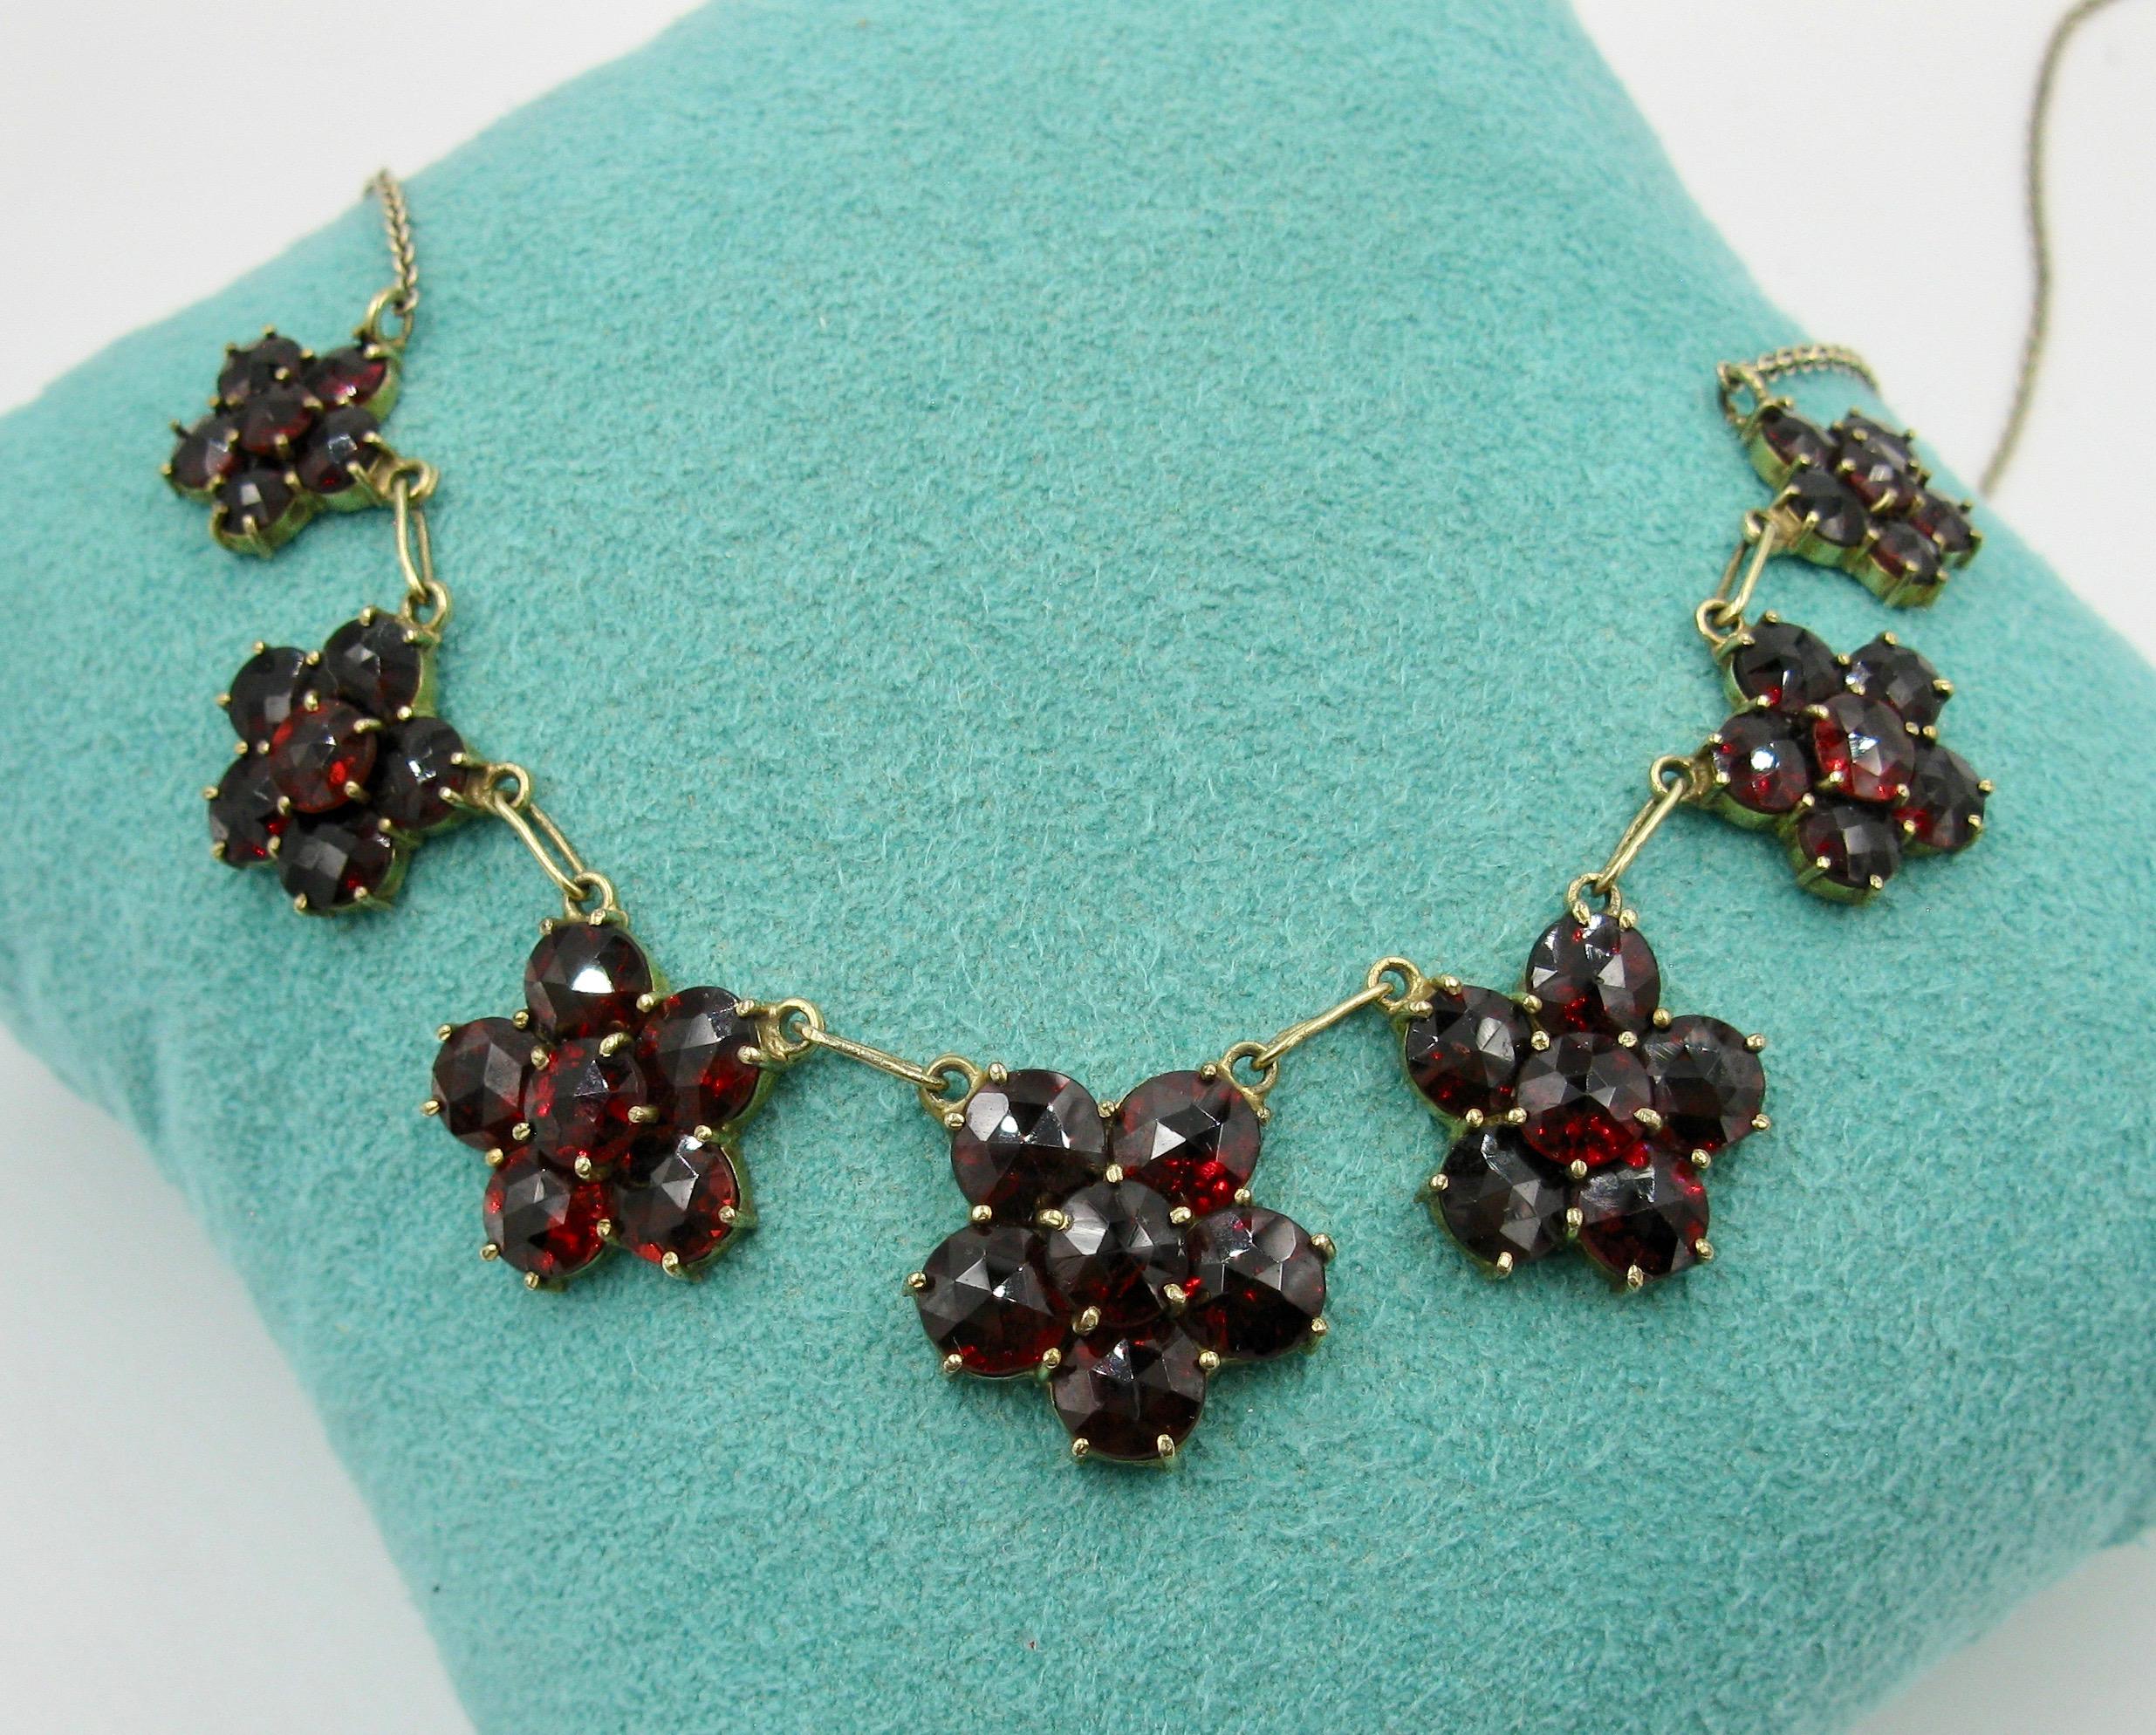 A GORGEOUS ANTIQUE VICTORIAN BELLE EPOQUE NATURAL BOHEMIAN GARNET NECKLACE WITH FLOWER FLORETS IN THE CHAIN OF SUPERB LARGE DEEP RED WINE GARNETS OF THE HIGHEST QUALITY SET IN SOLID 9 CARAT ROSE GOLD. DATING TO C1900.  MAGNIFICENT!
This is a